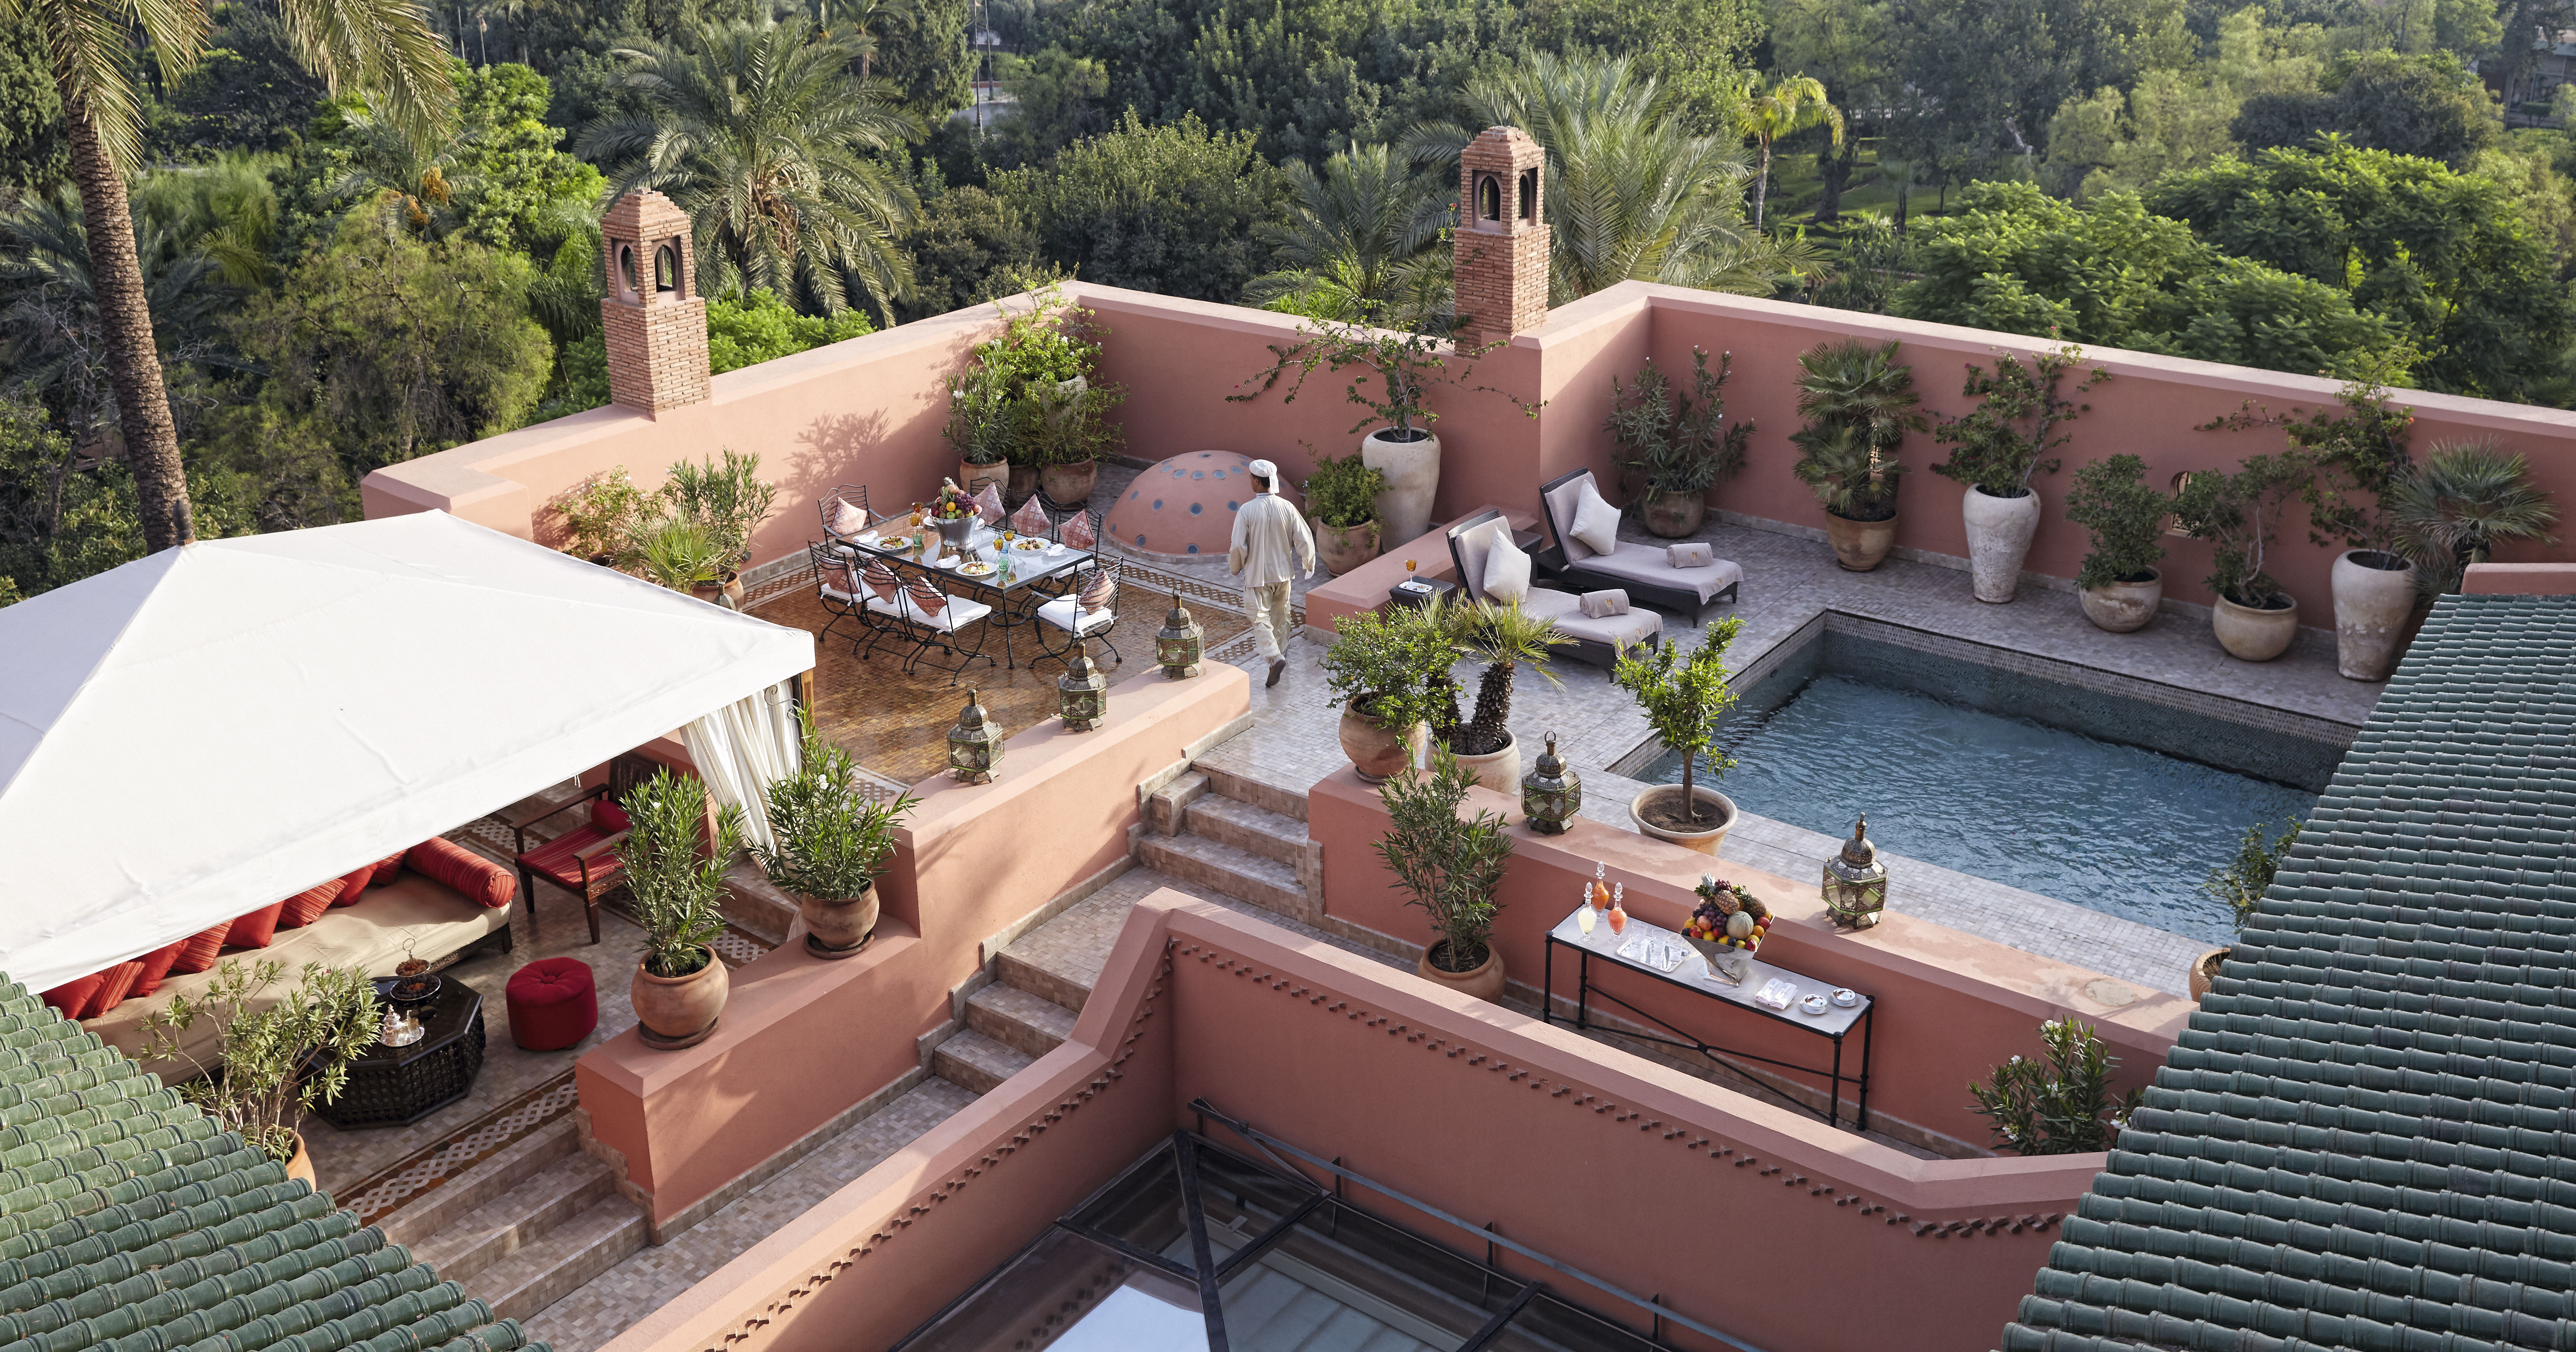 Royal Mansour Marrakech voted the best hotel in Africa by Condé Nast Traveler